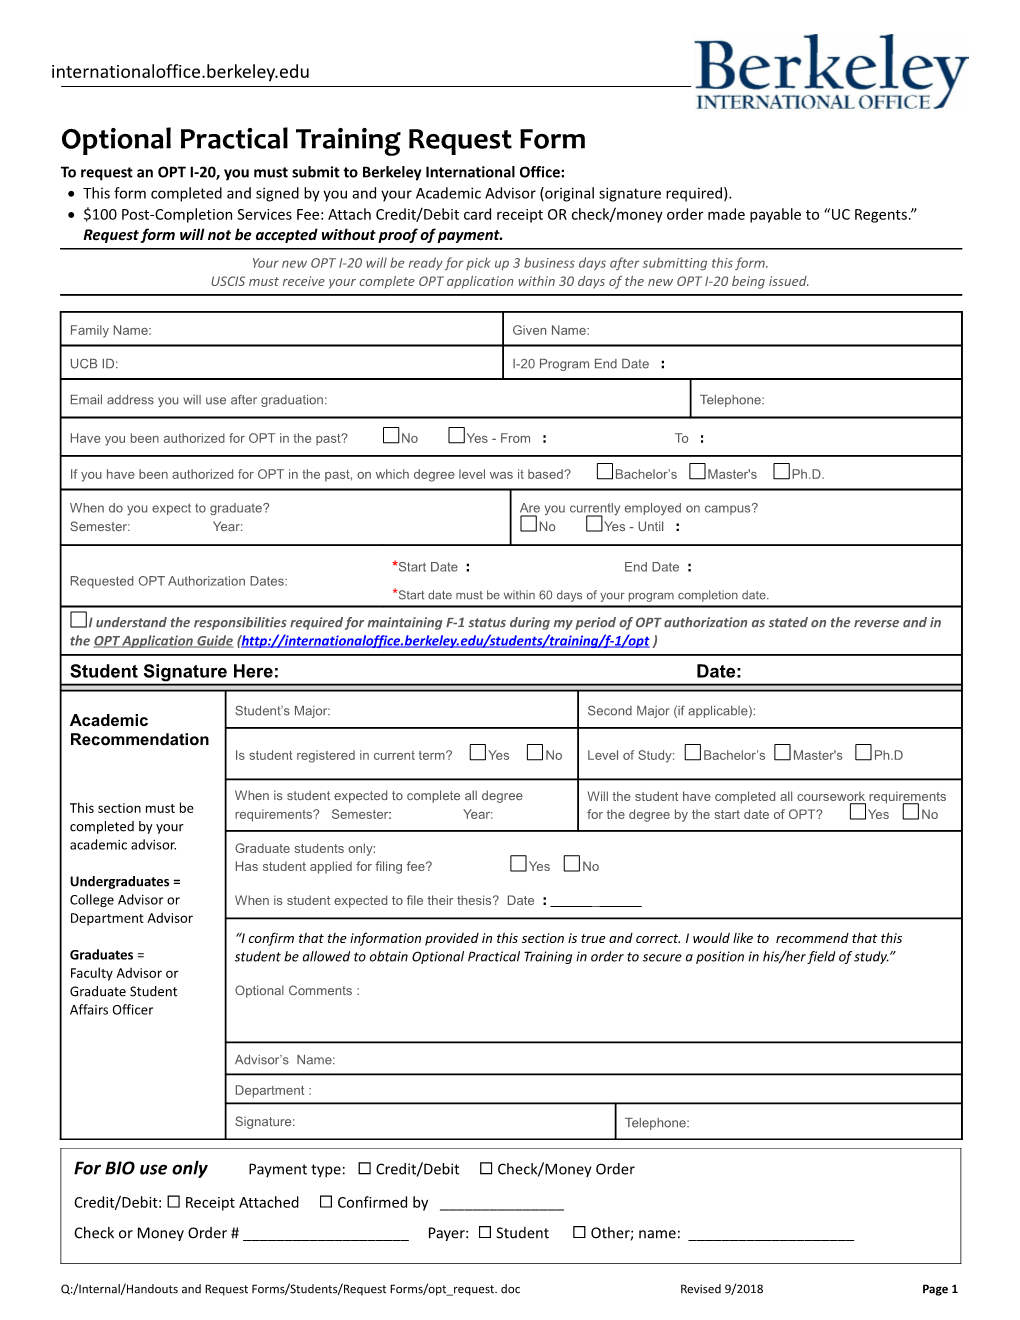 Optional Practical Training Request Form